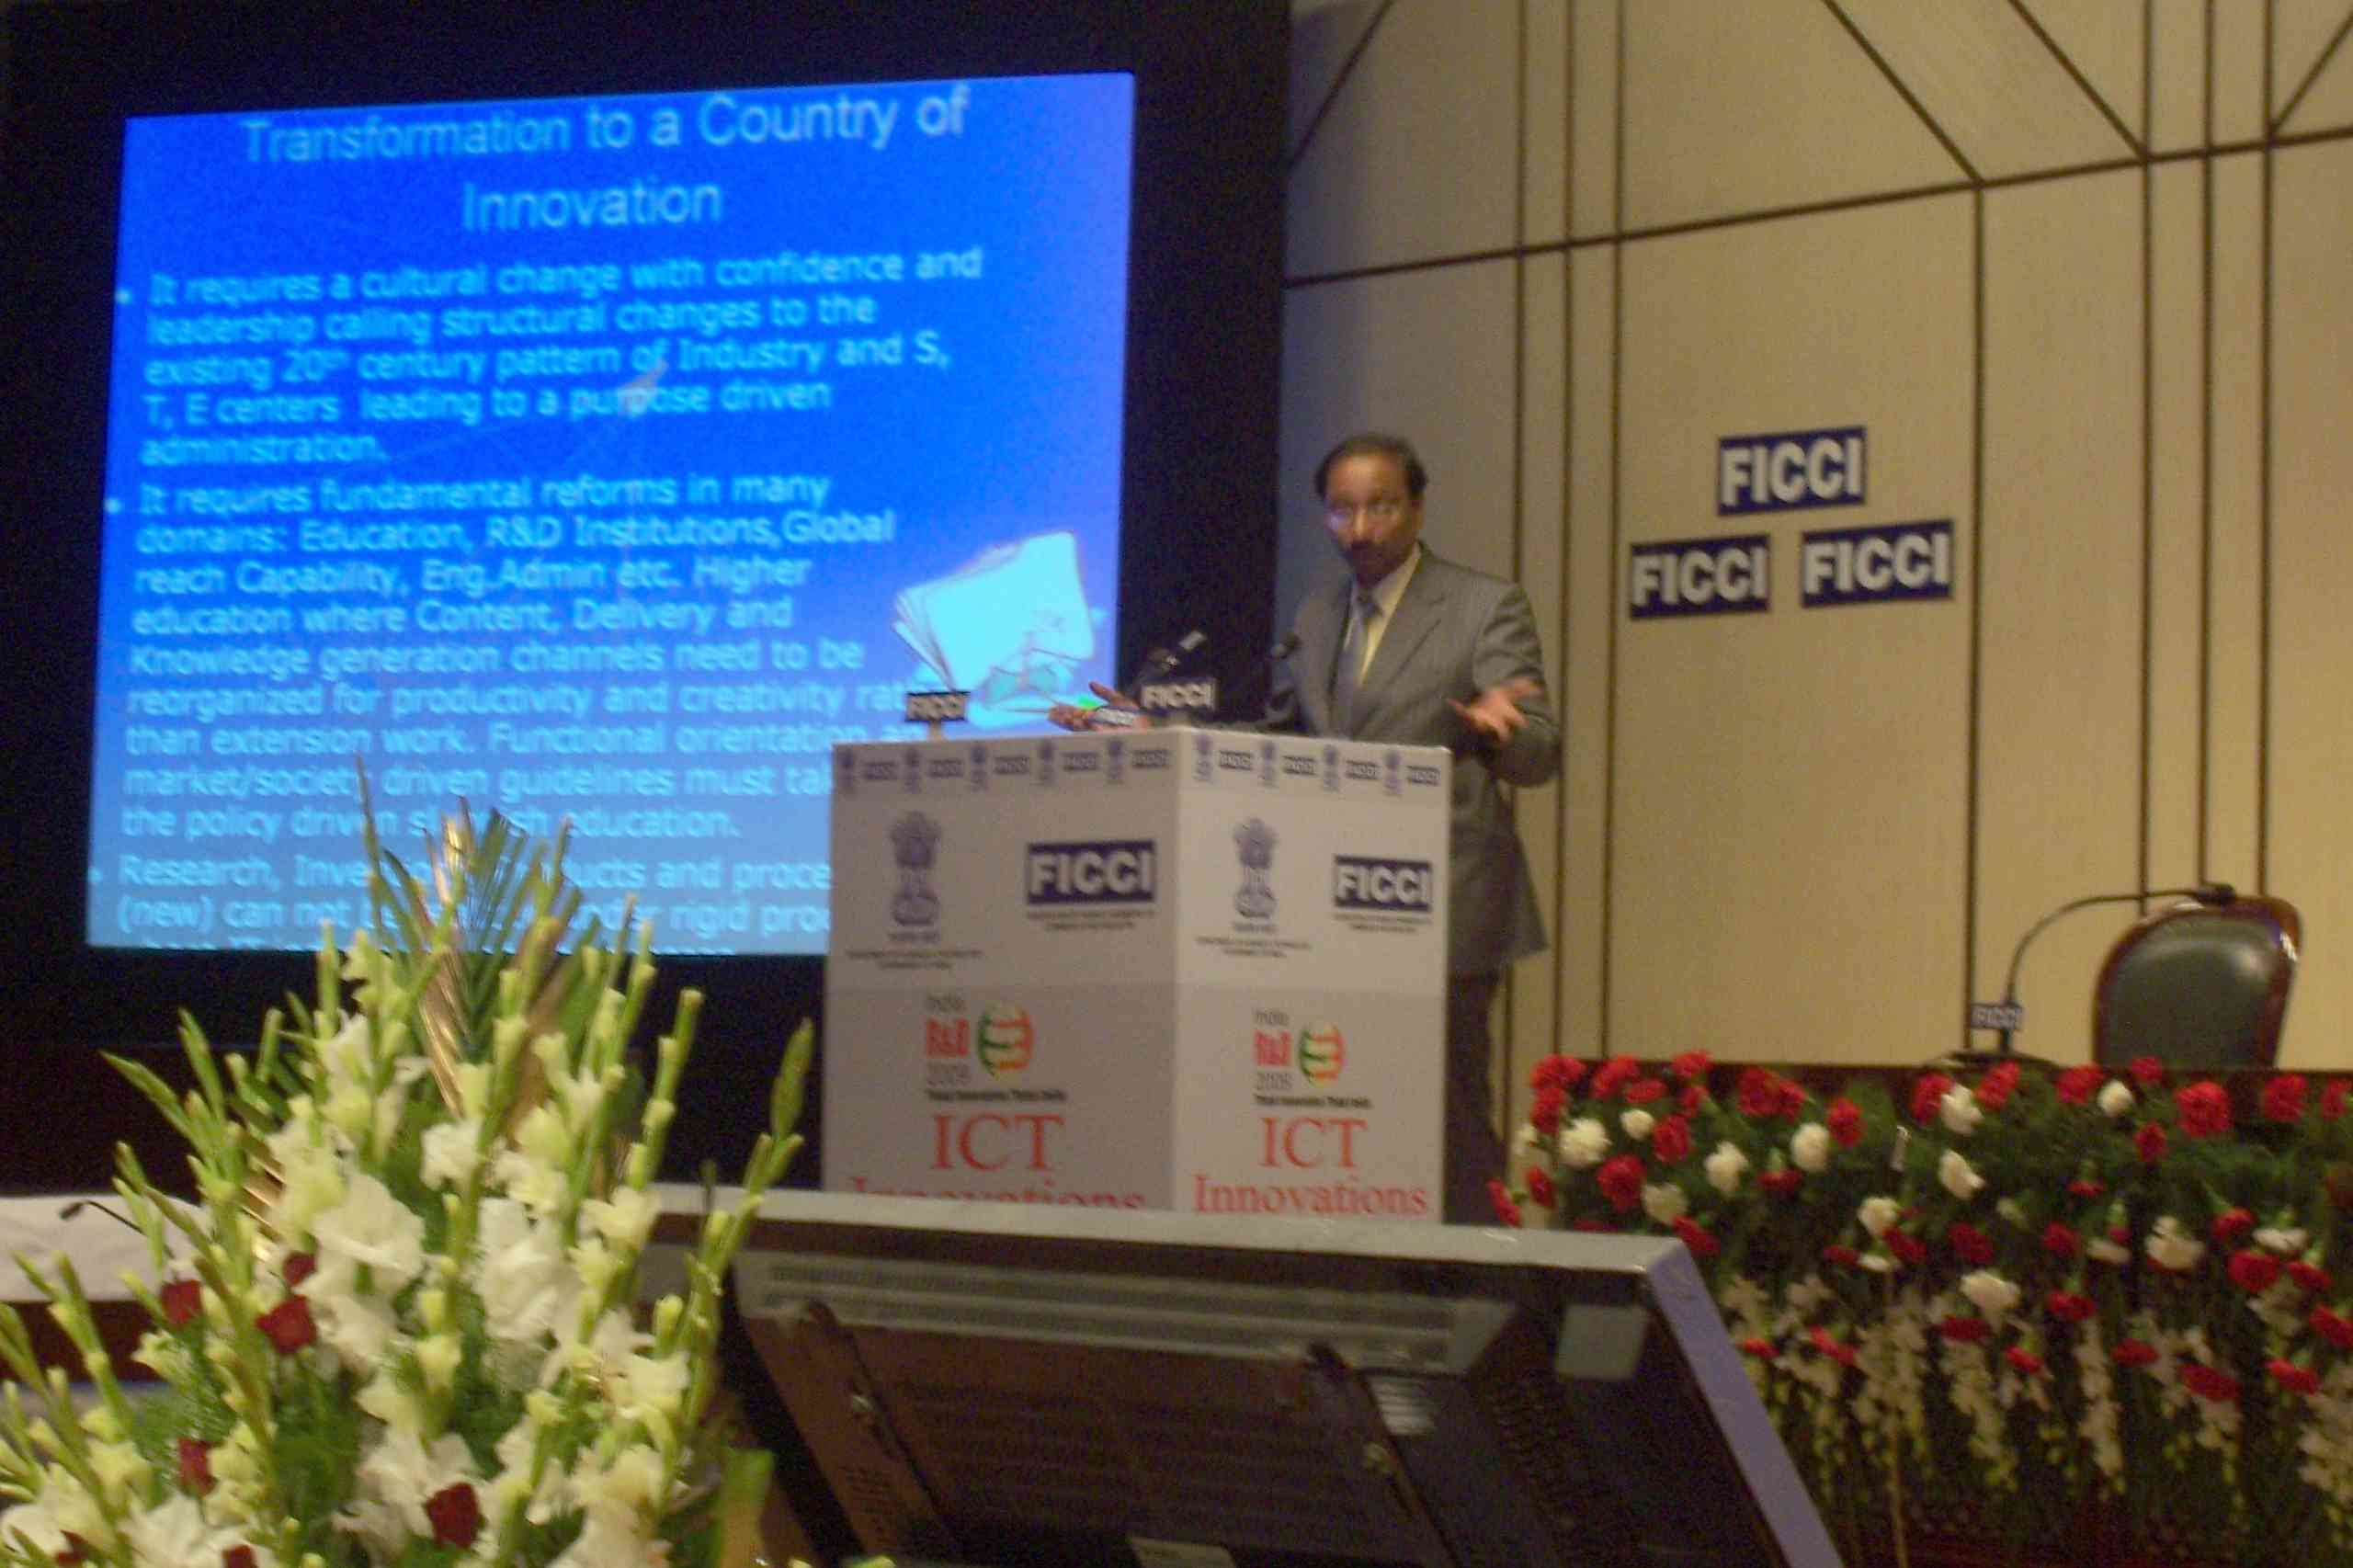 Address FICCI, Innovations in ICT